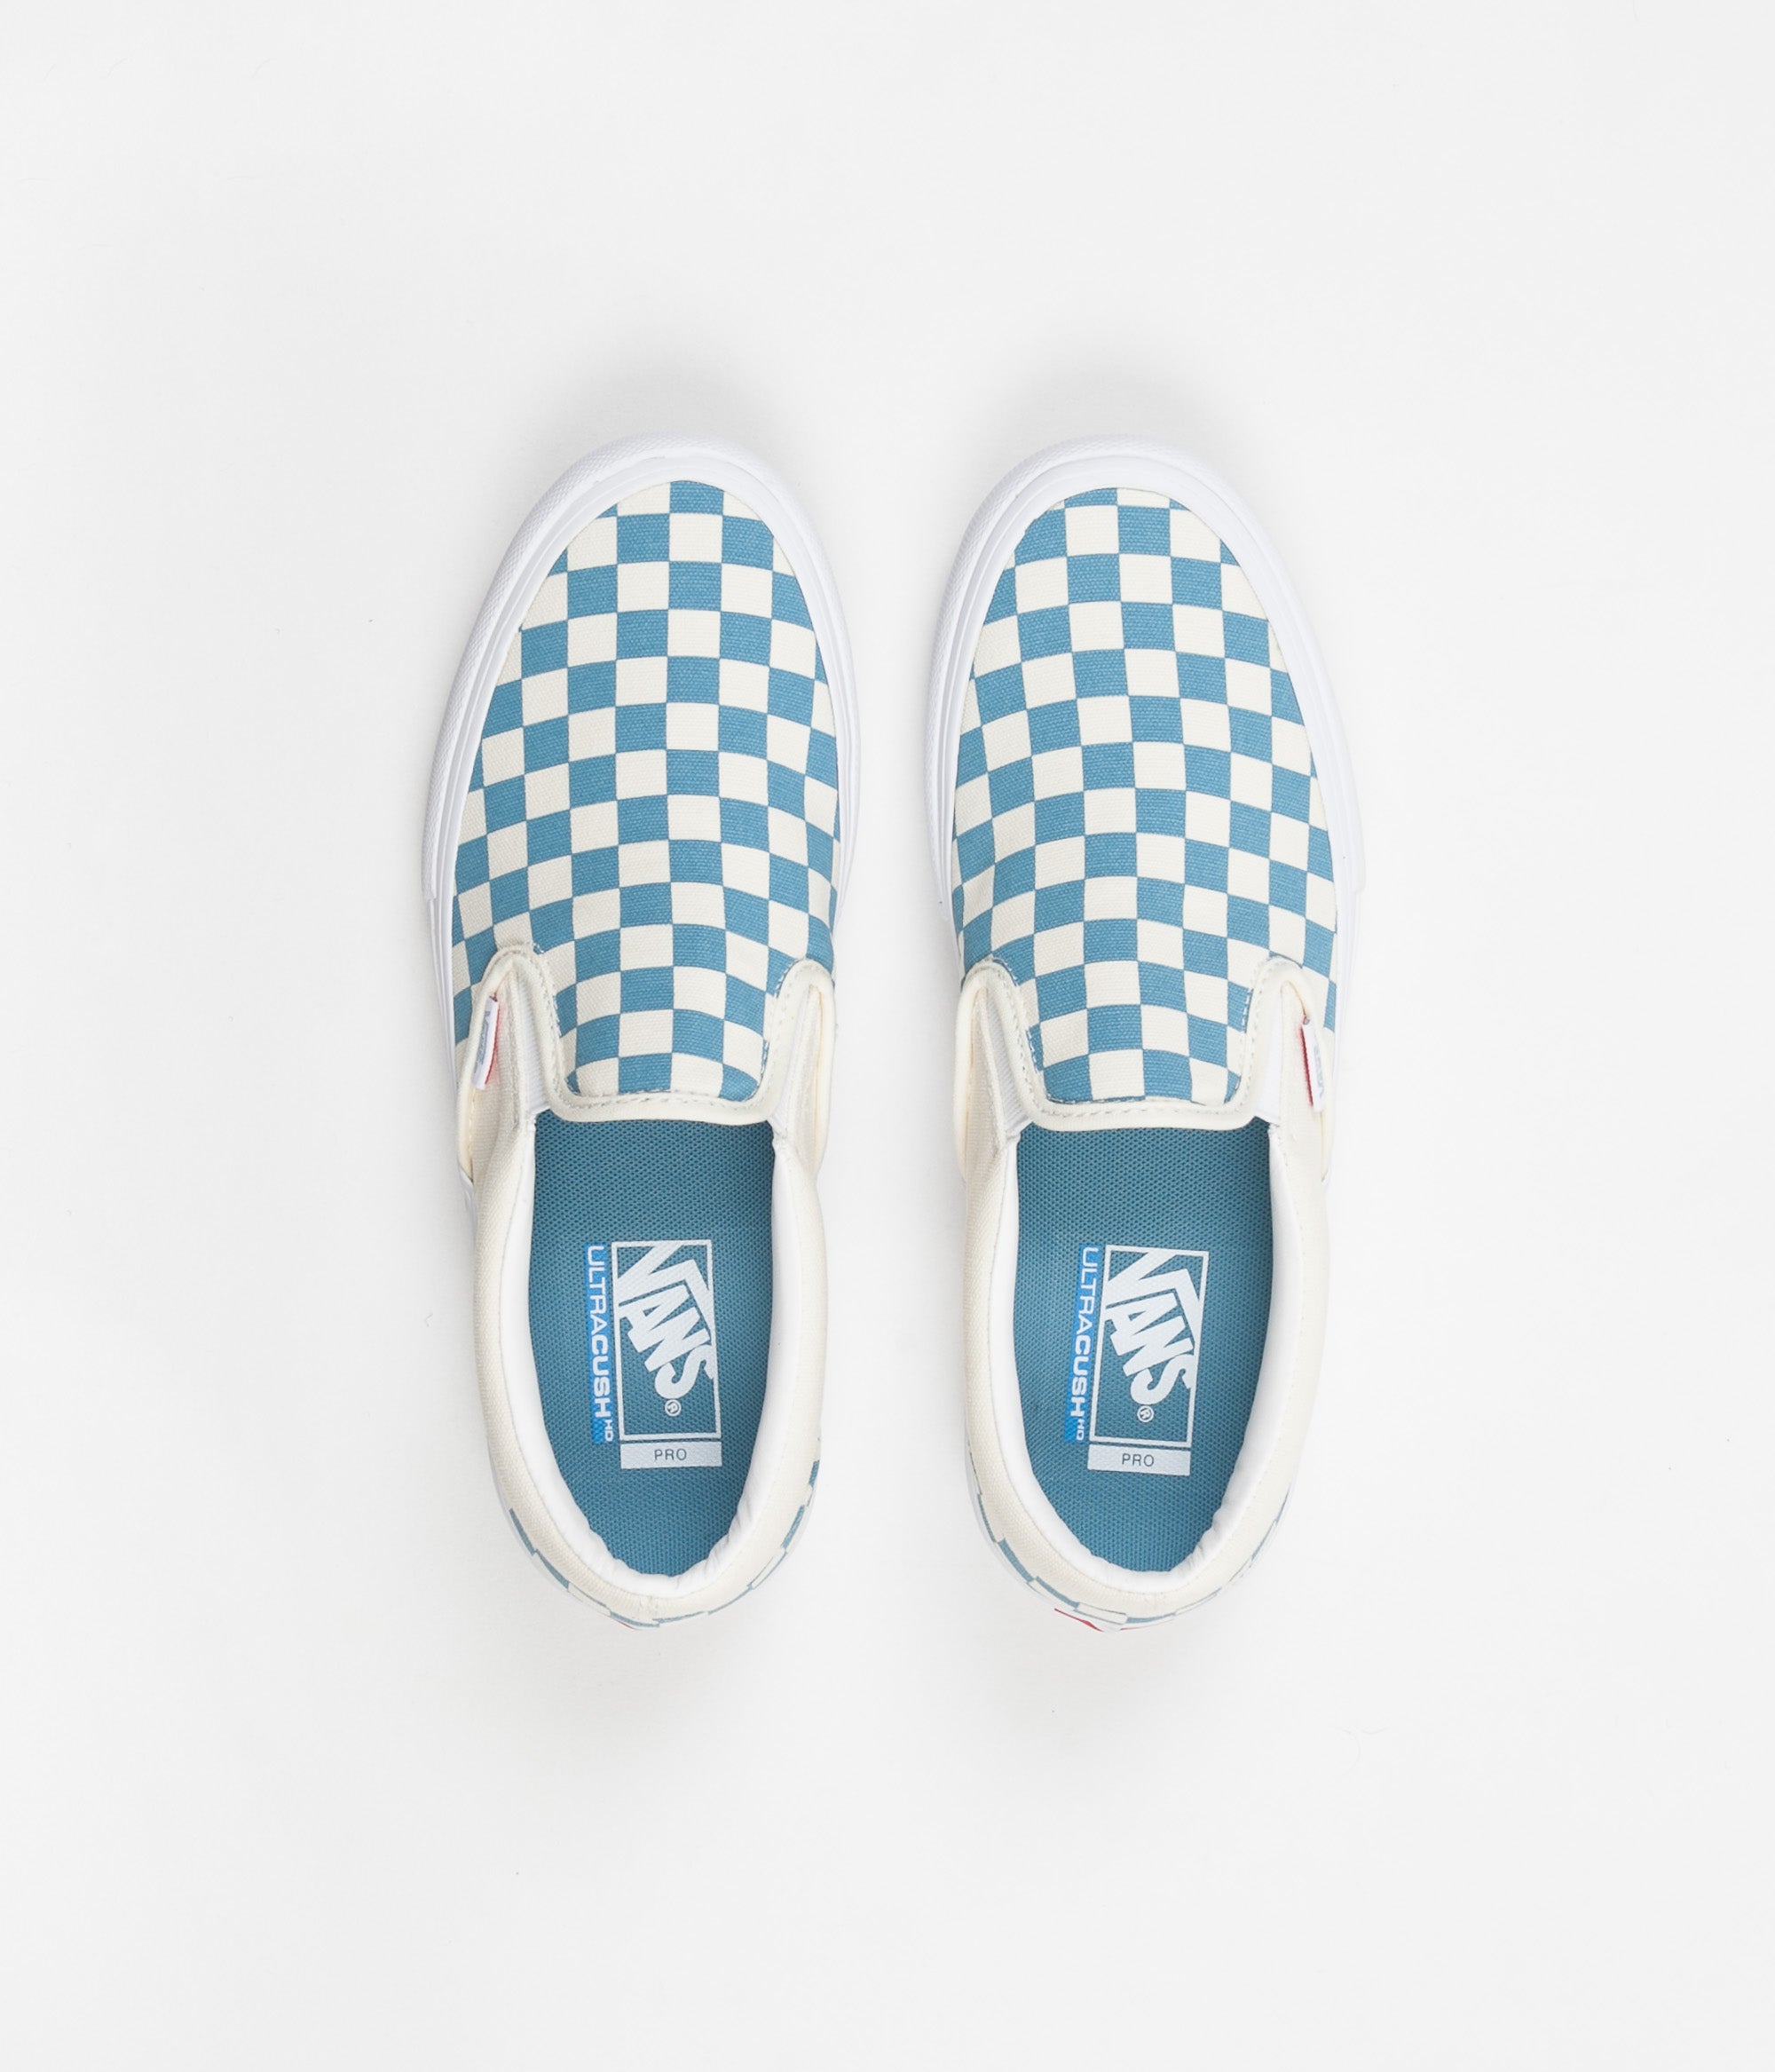 Vans Slip On Pro Checkerboard Shoes 